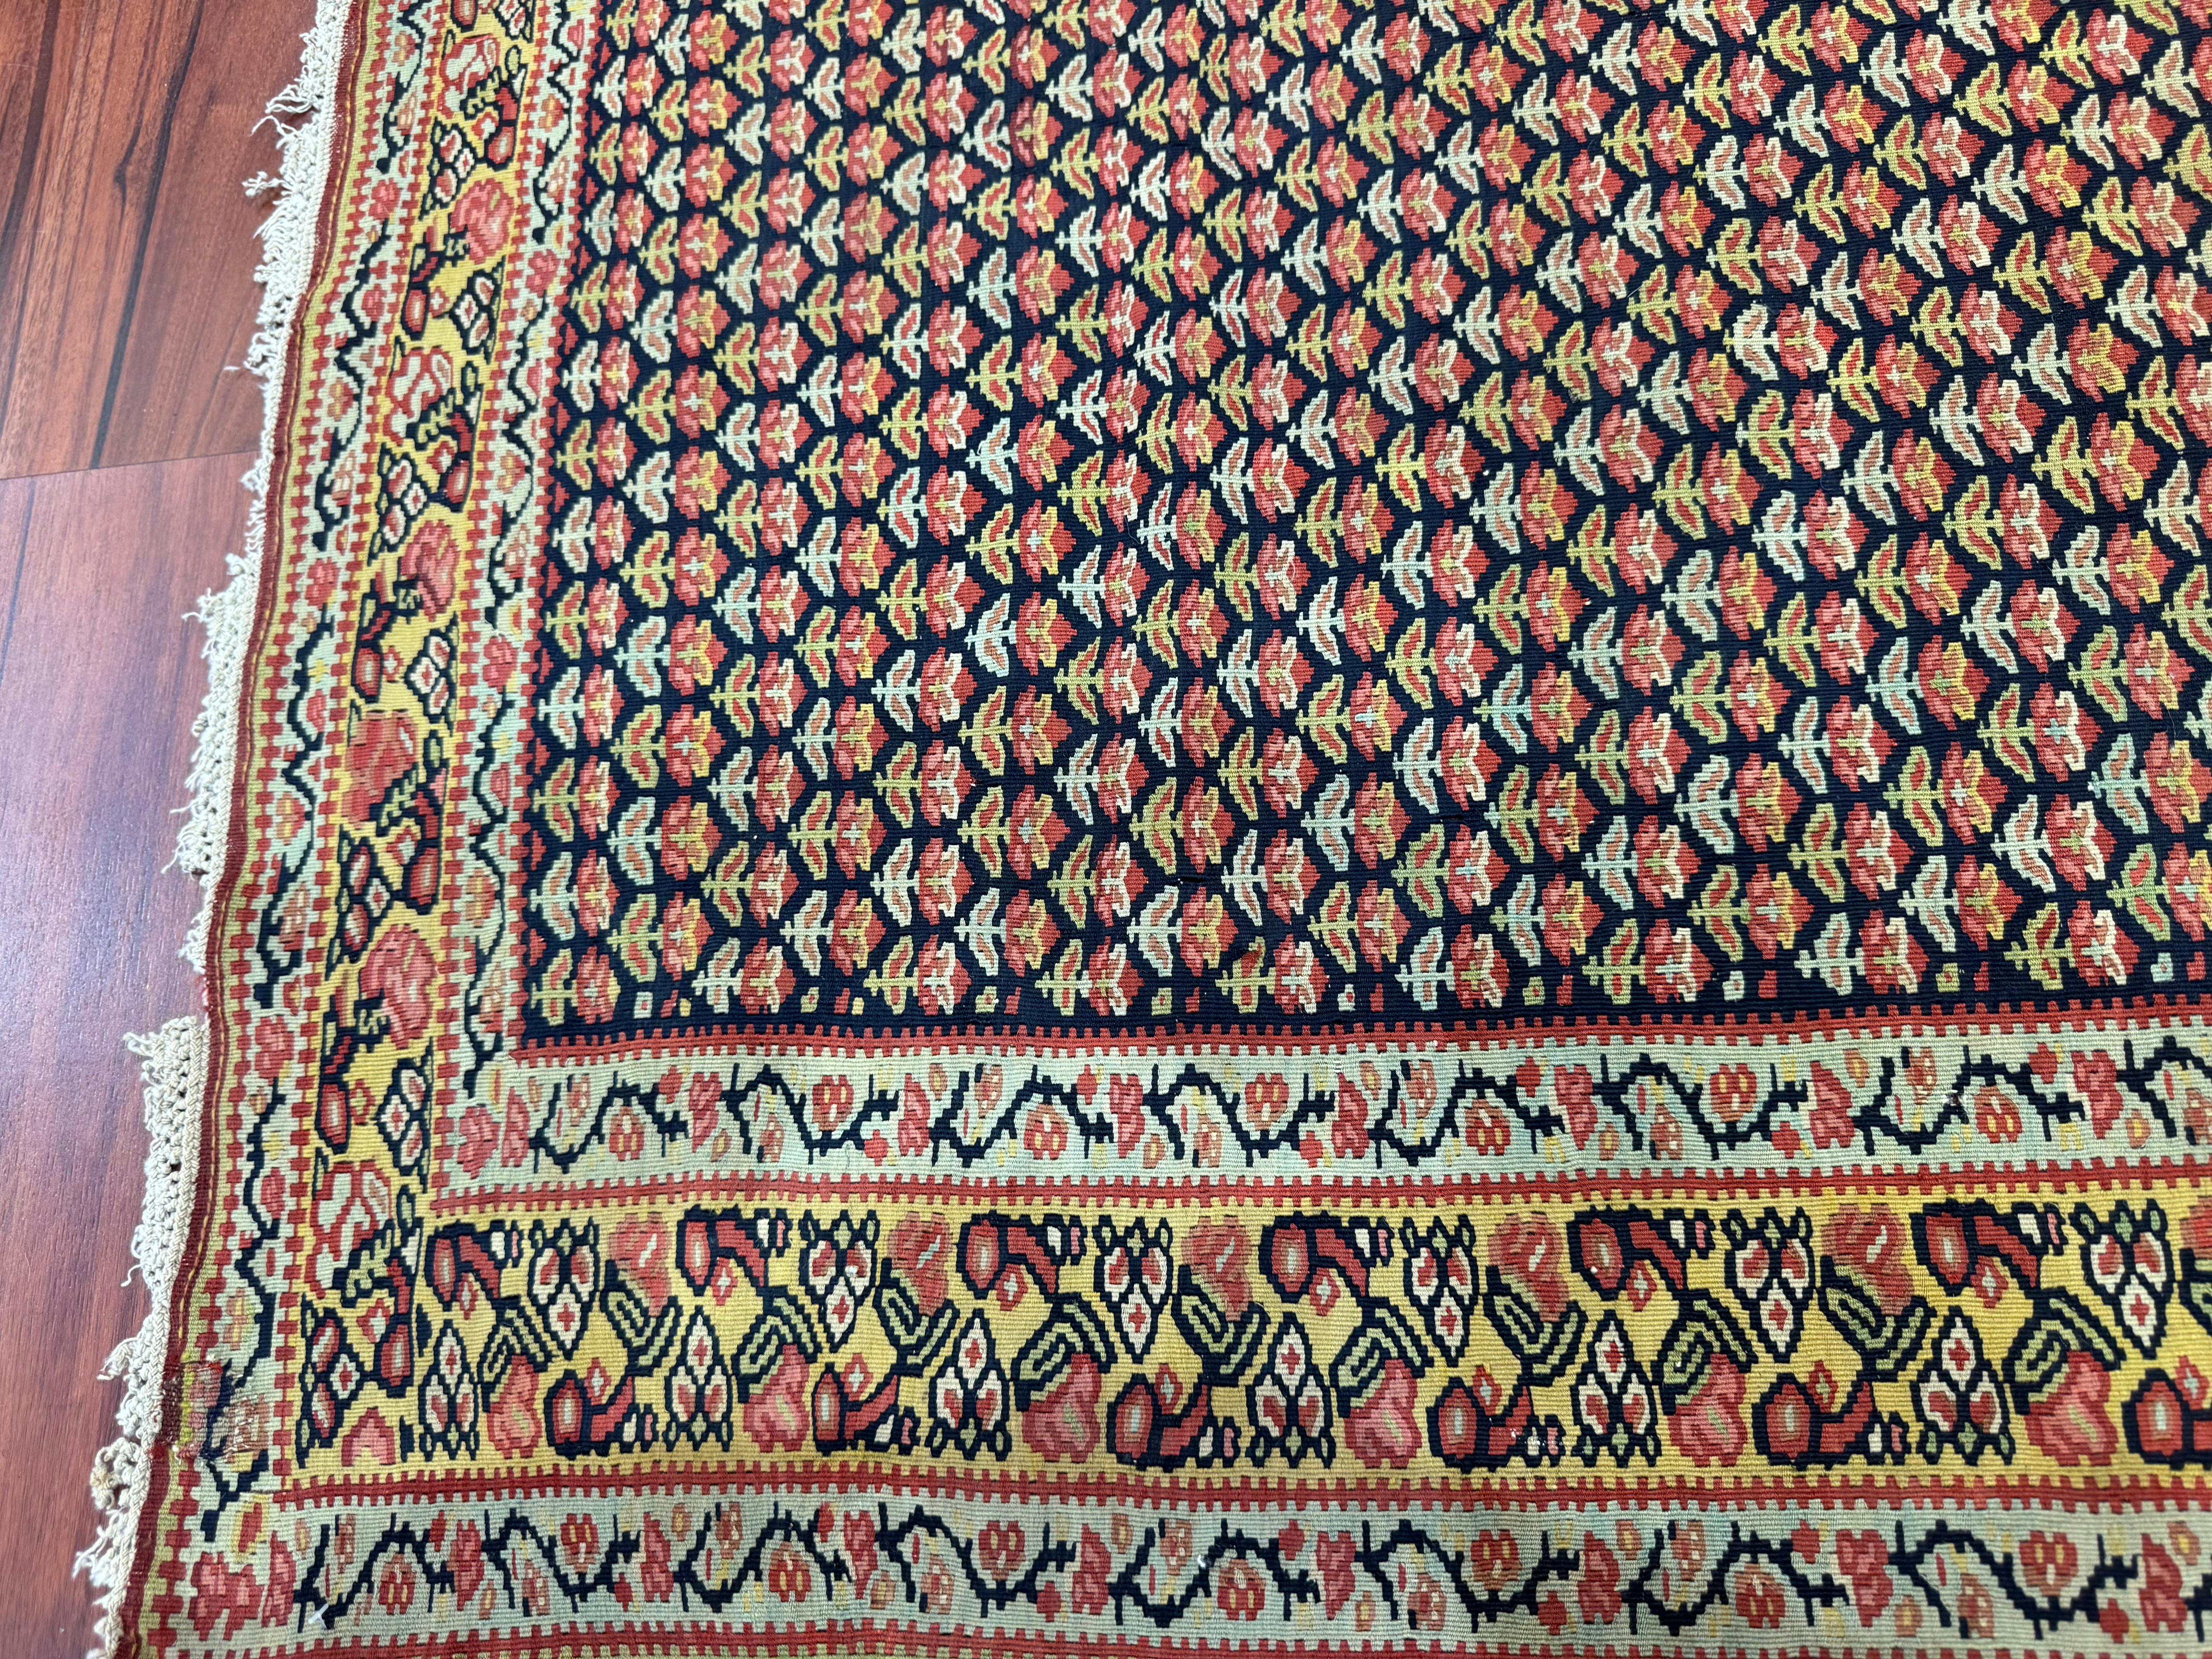 A stunning Antique Senneh Kilim rug that measures in at 3’6” width and 4’10” length. These rugs are known for their excellent compositions and fine weaves. This Rug originated from Iran in the early 1900s and is in excellent condition considering